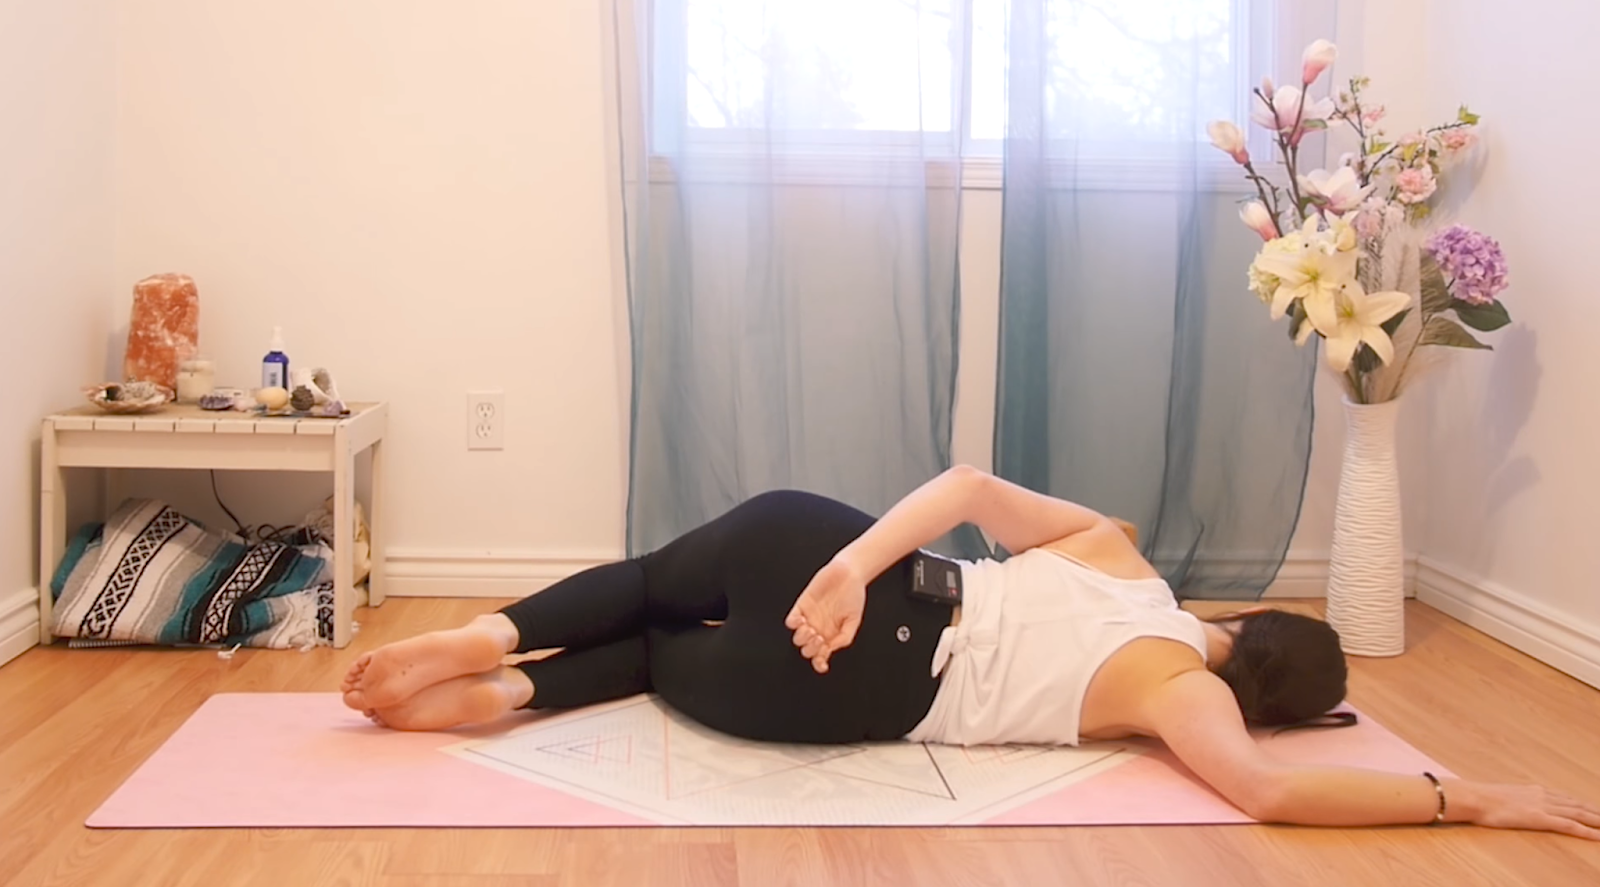 6 Yin Poses to Relieve Upper Body Tension - Yoga with Kassandra Blog